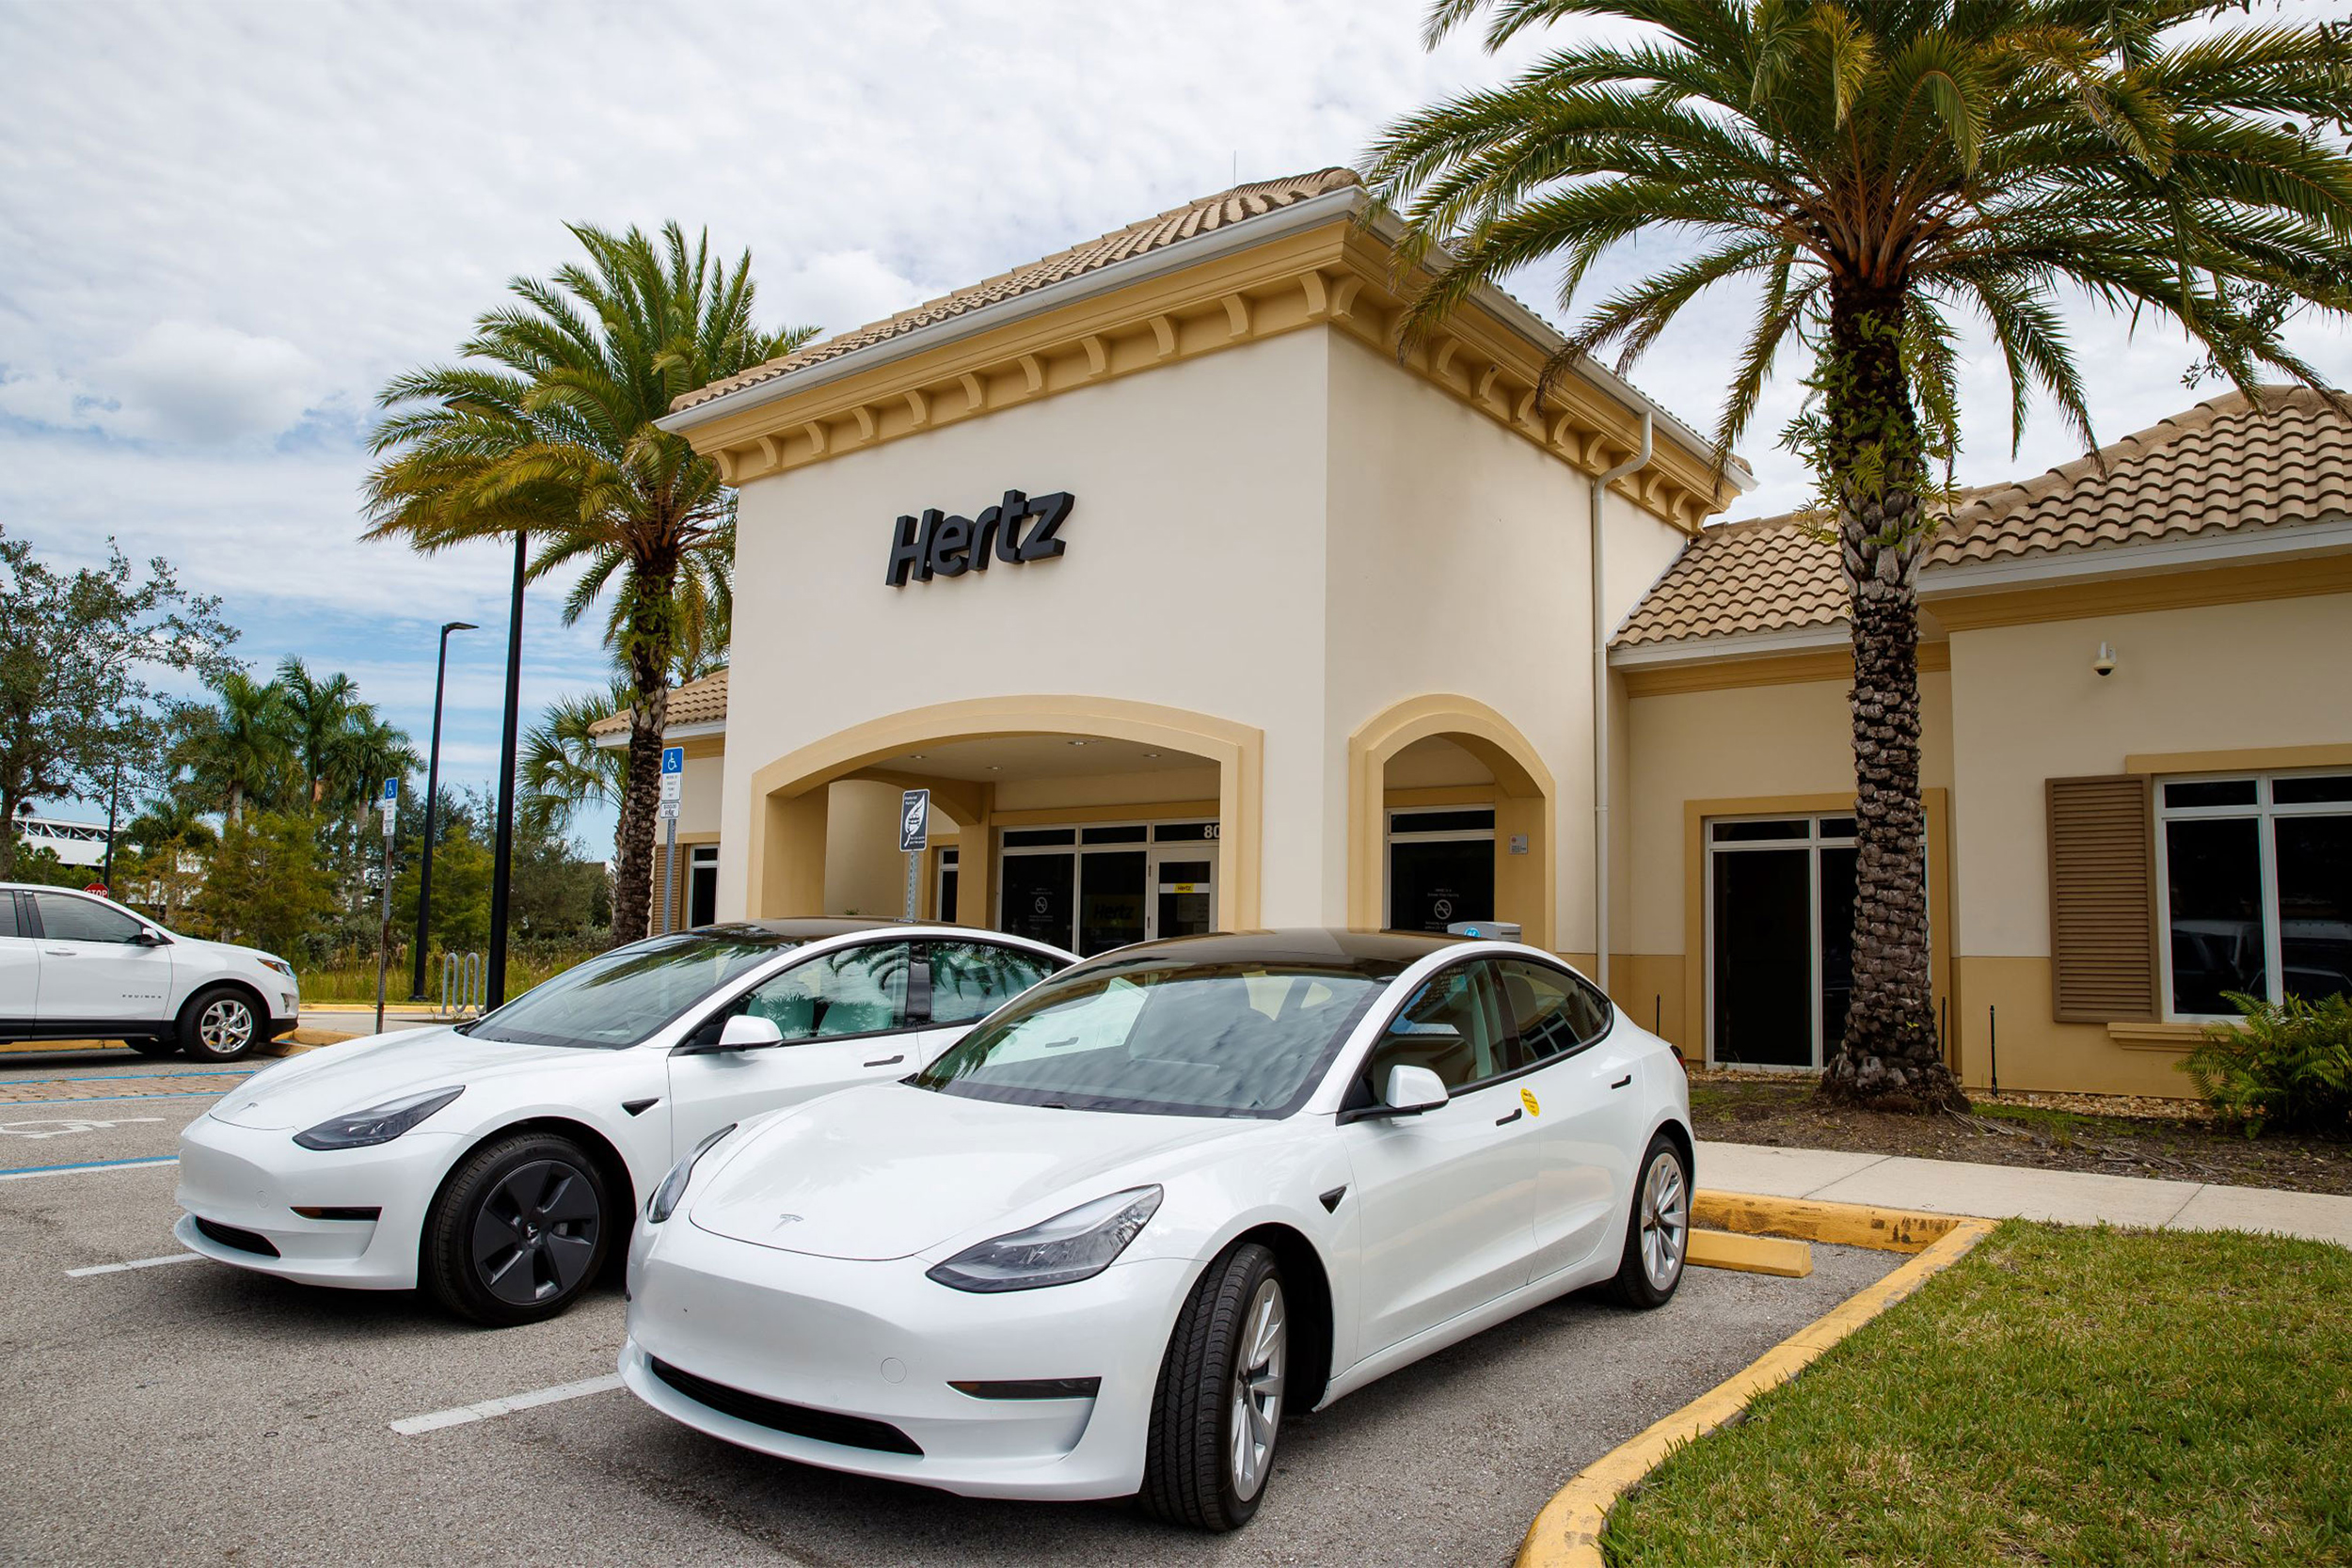 Rental company Hertz has ordered 100,000 cars from Tesla